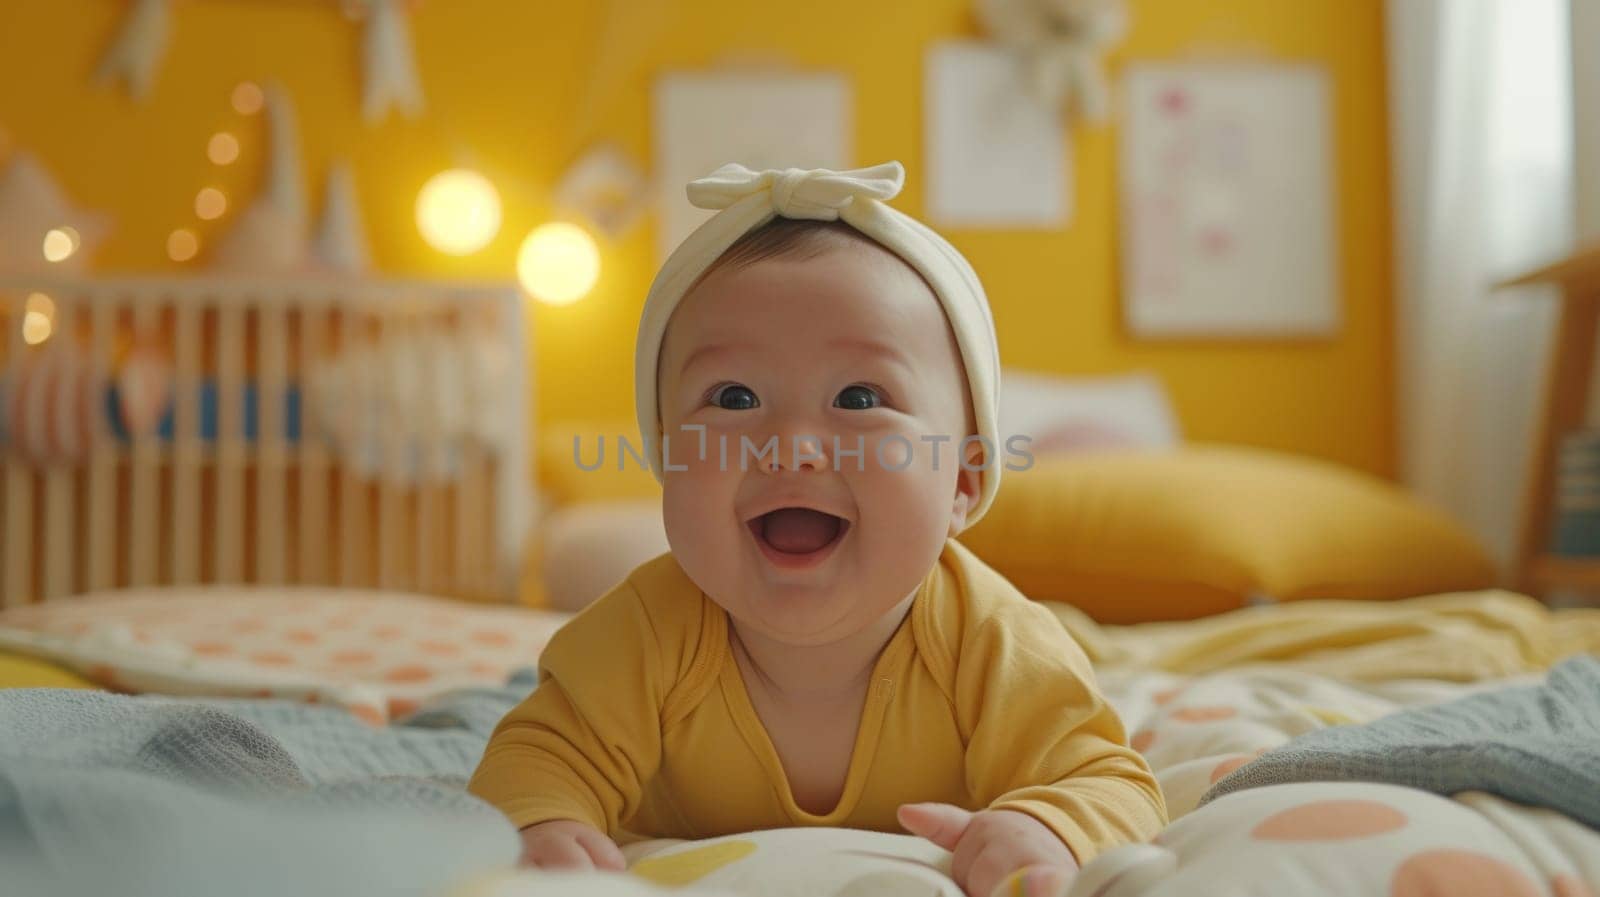 A baby smiling while laying on a bed in the background, AI by starush